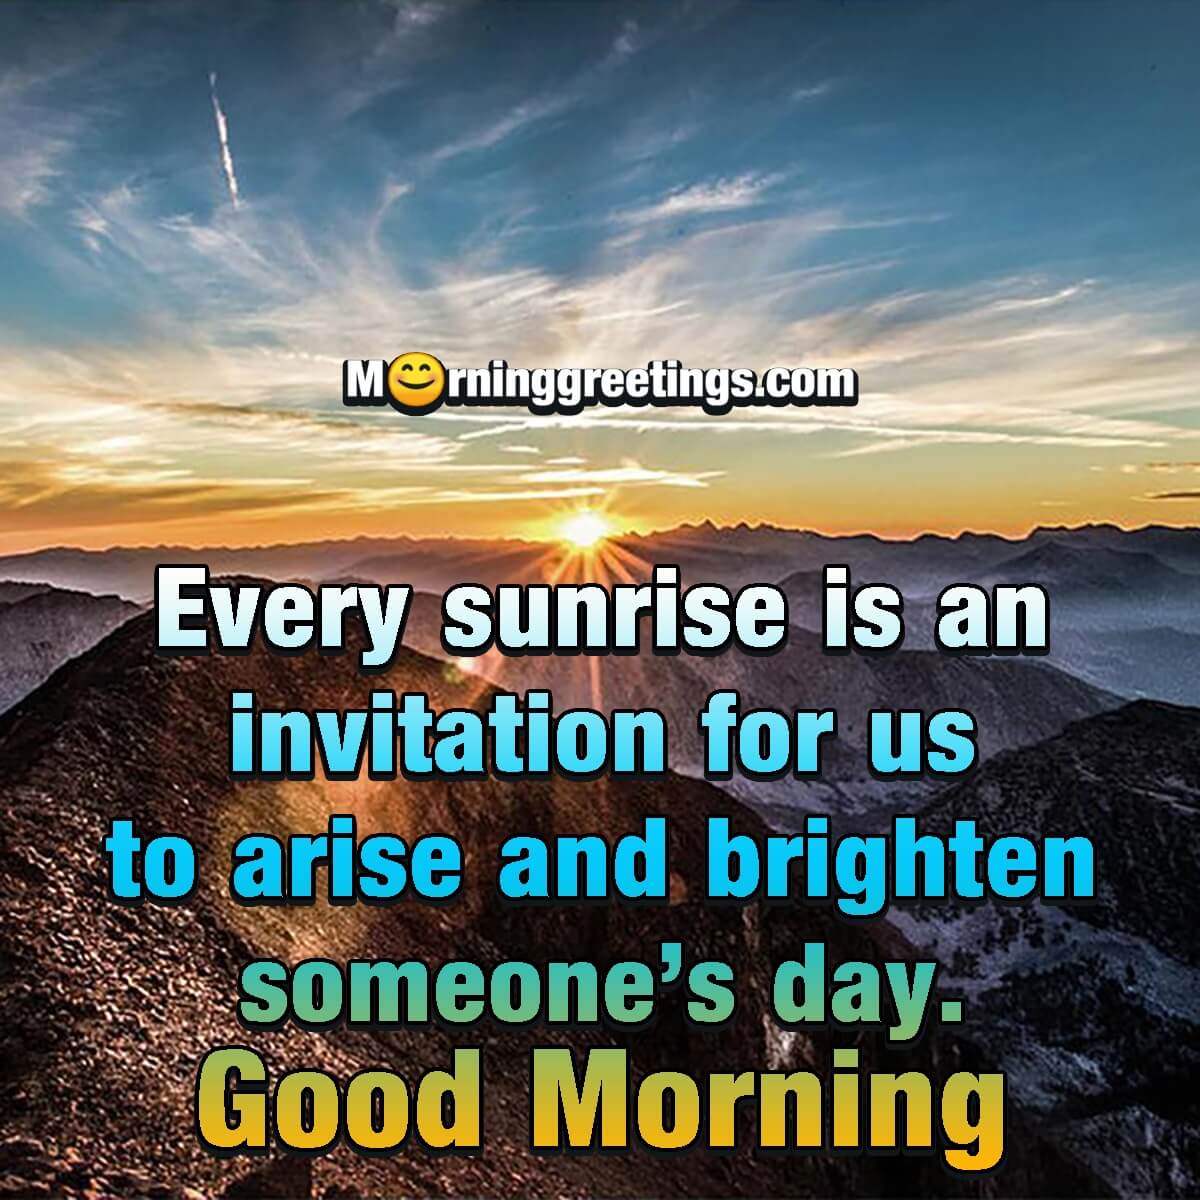 30 Good Morning Inspirational Quotes Of The Day - Morning ...